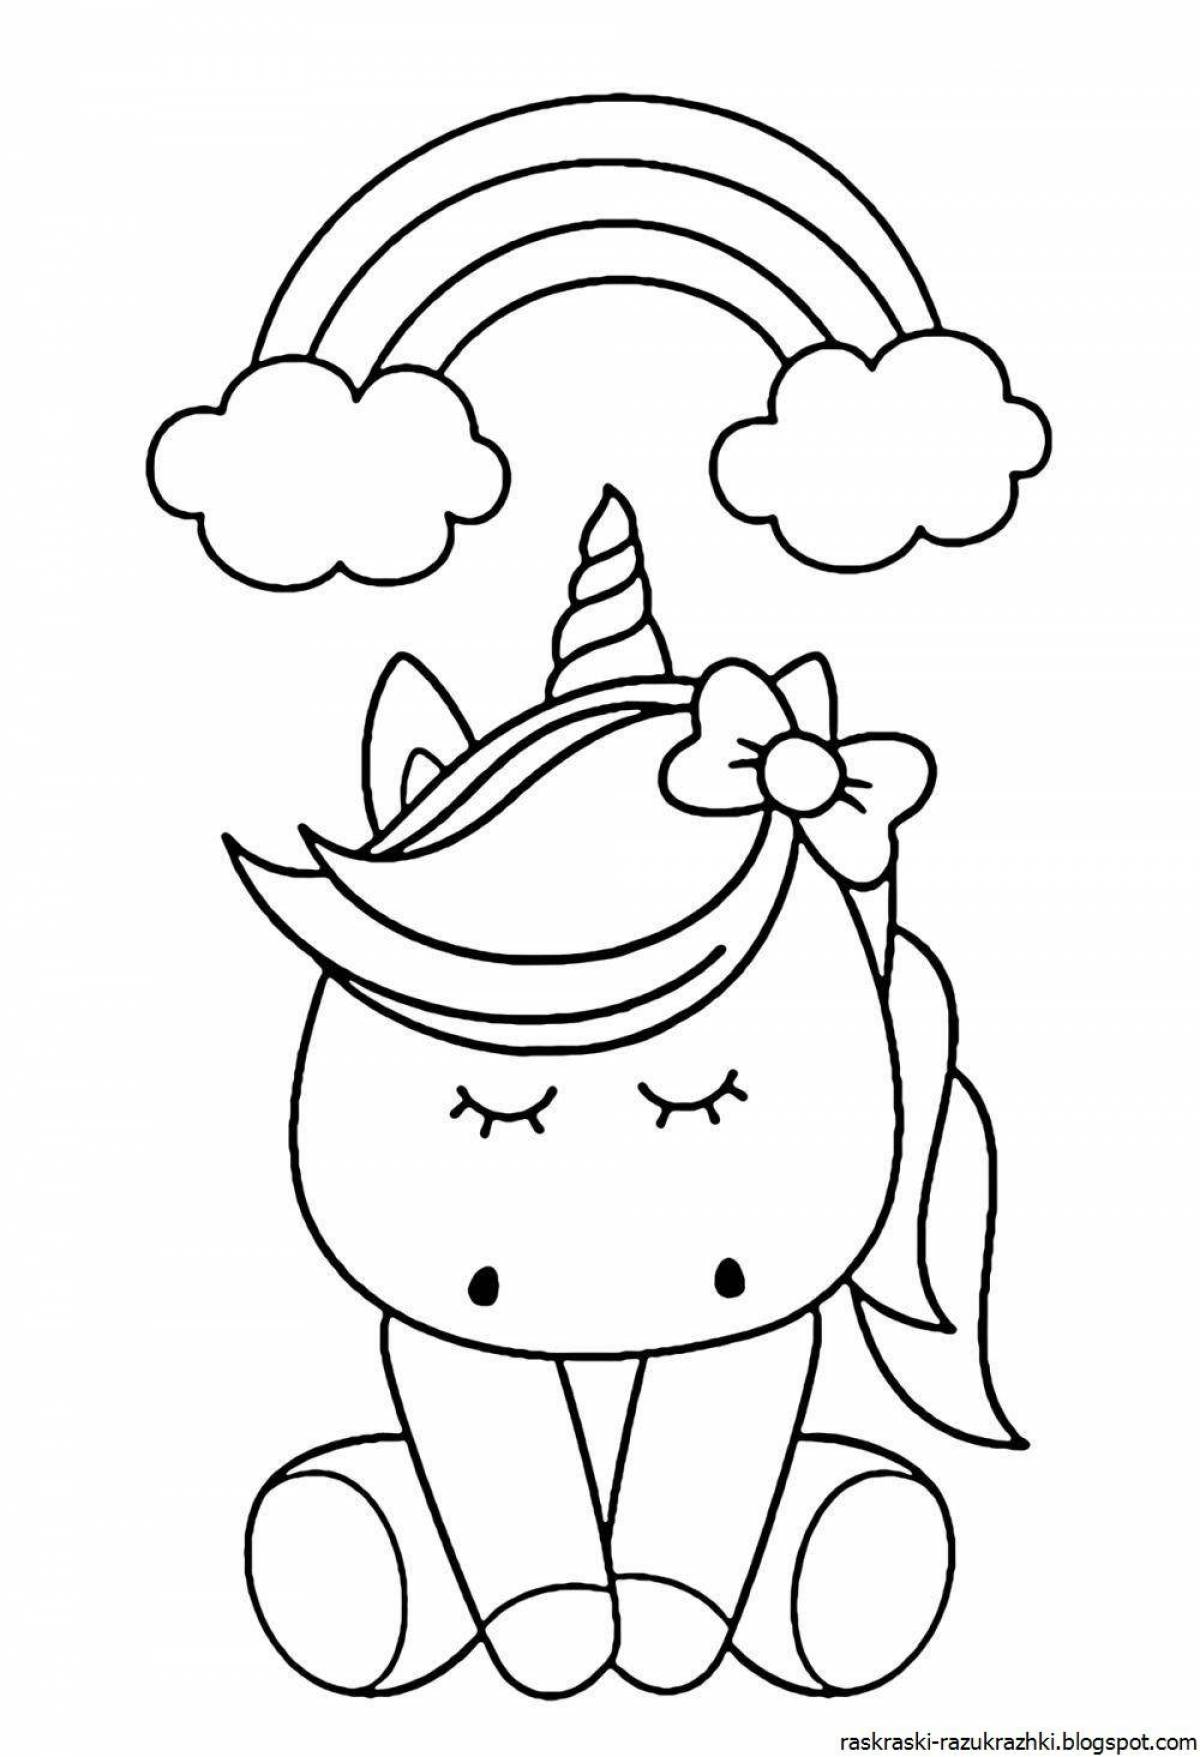 Serene coloring page unicorns for girls